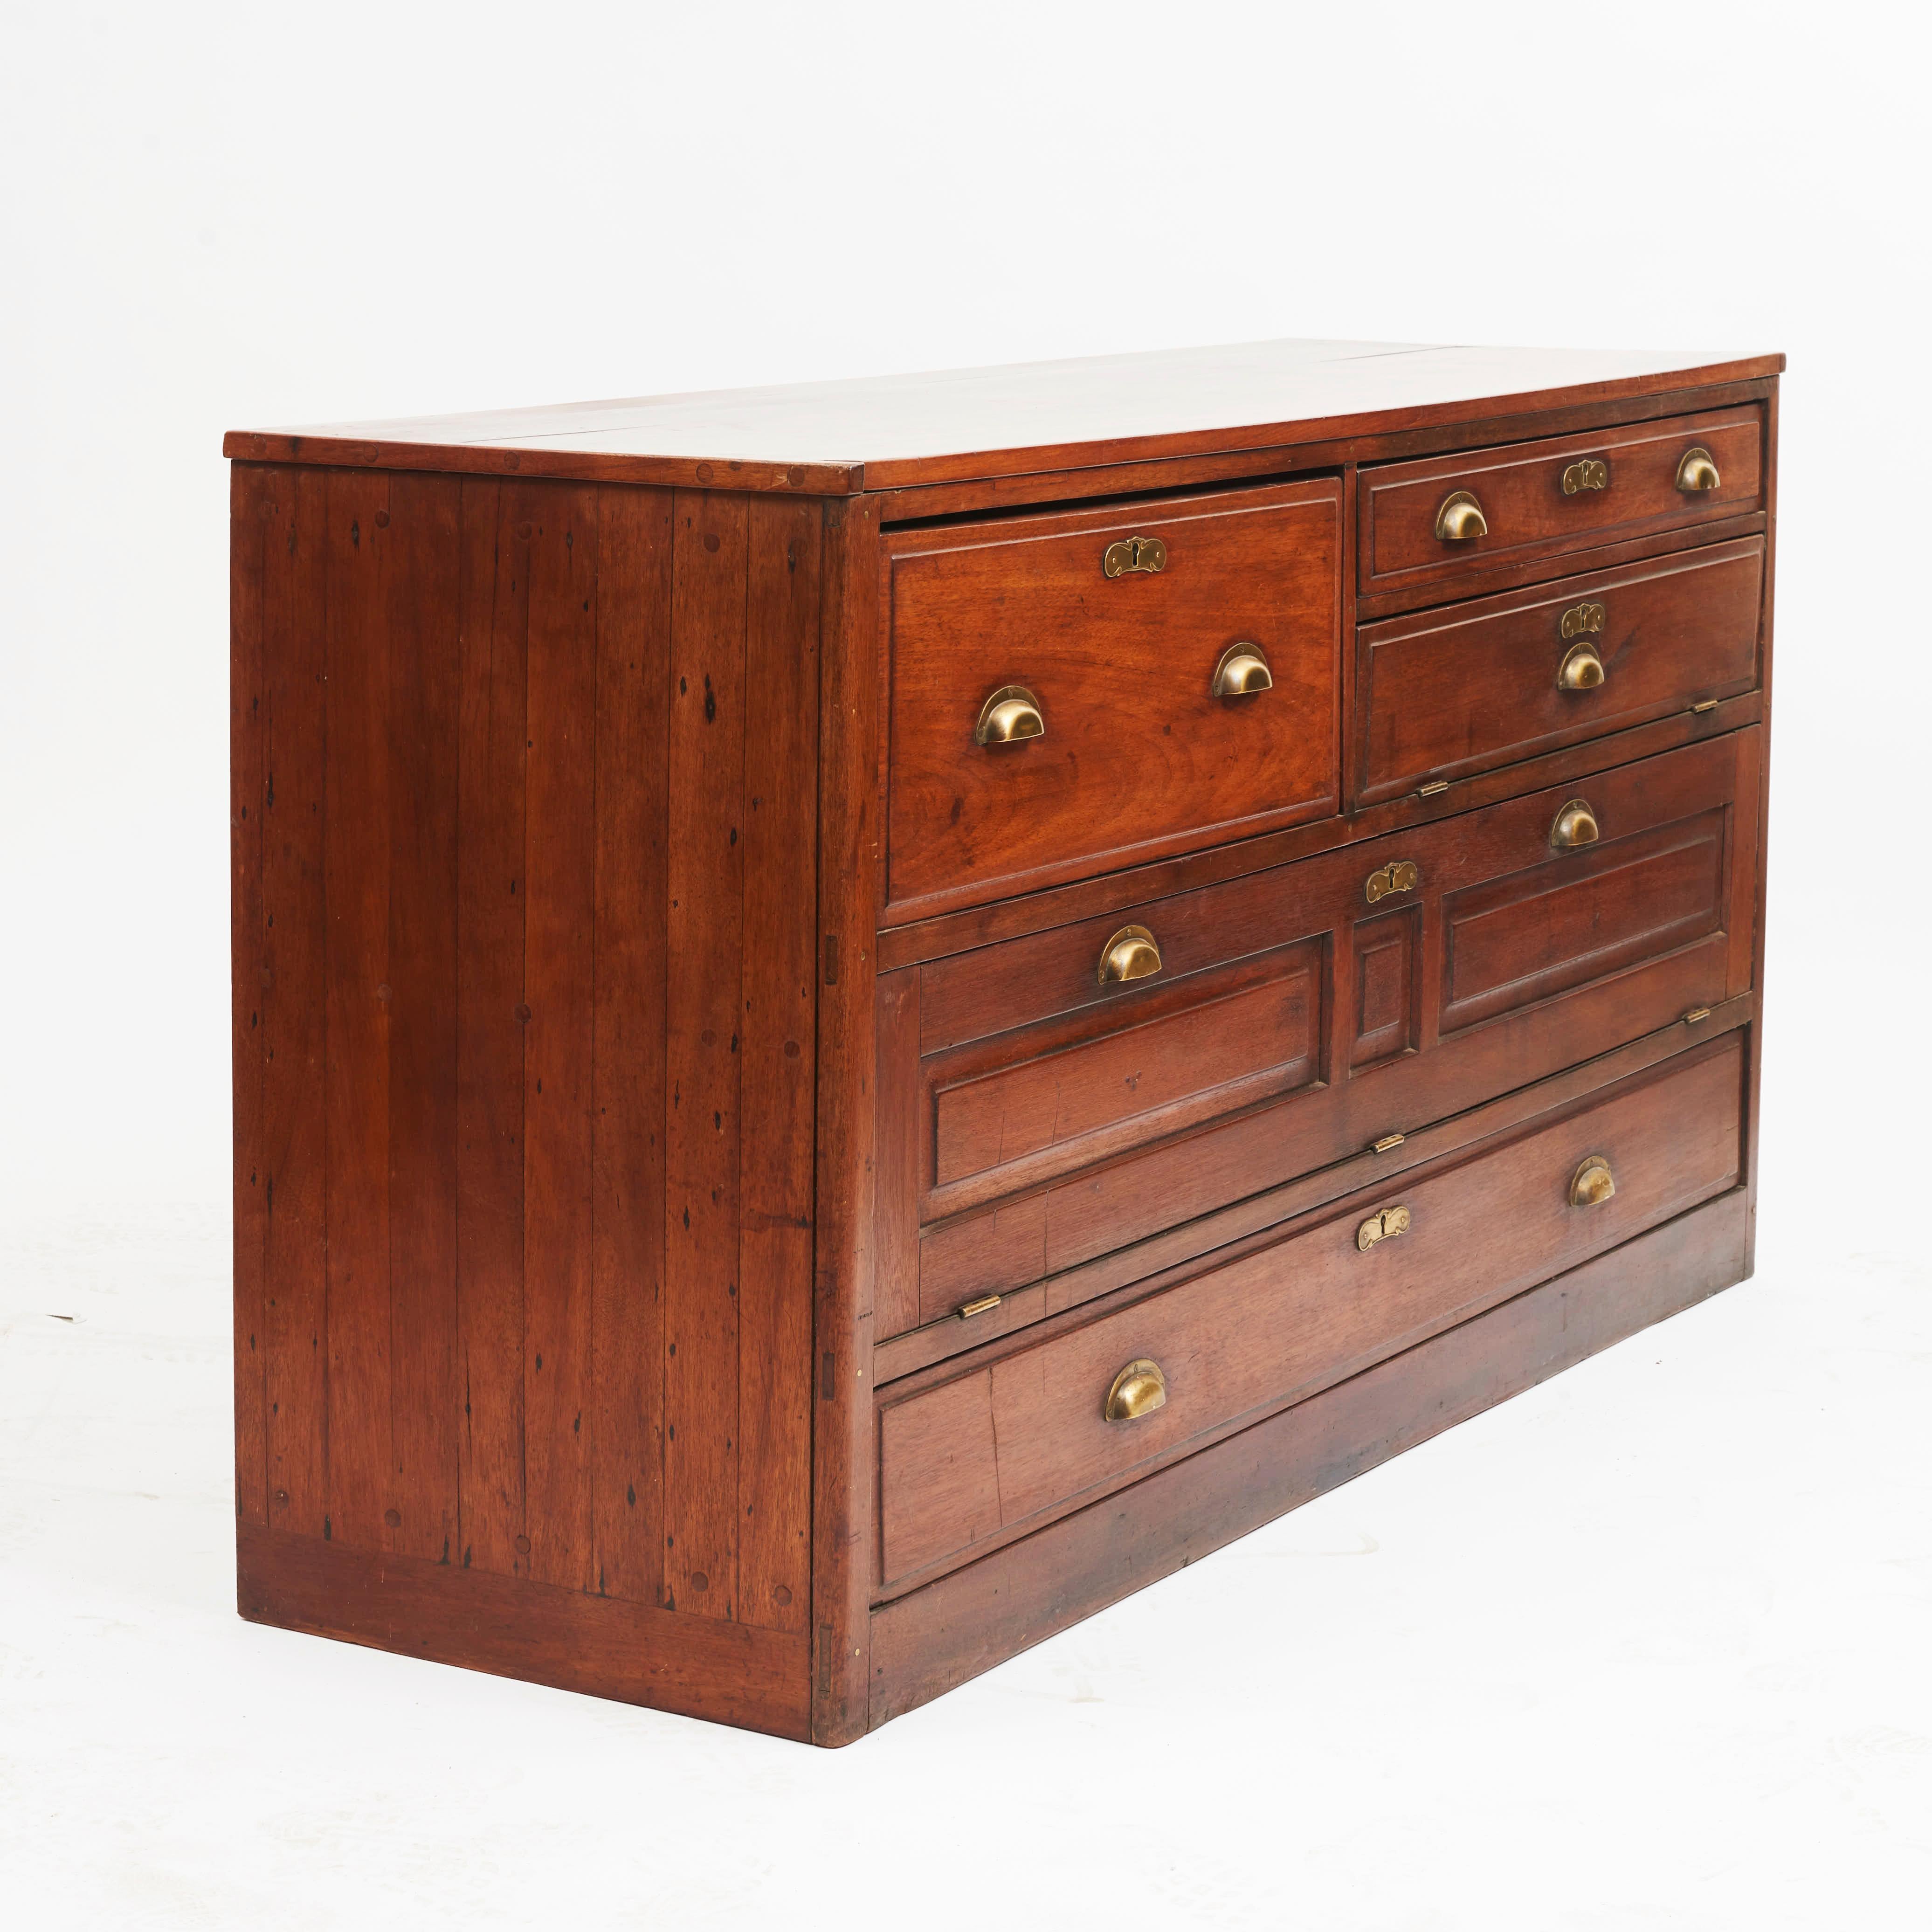 Ships chest of drawers in solid mahogany with original brass handles and locks.
Flaps and drawers used for storage of nautical chart etc.

Originated from the schooner F.F. Nicobar. 
Presumably made in England, dating back to the late 19th